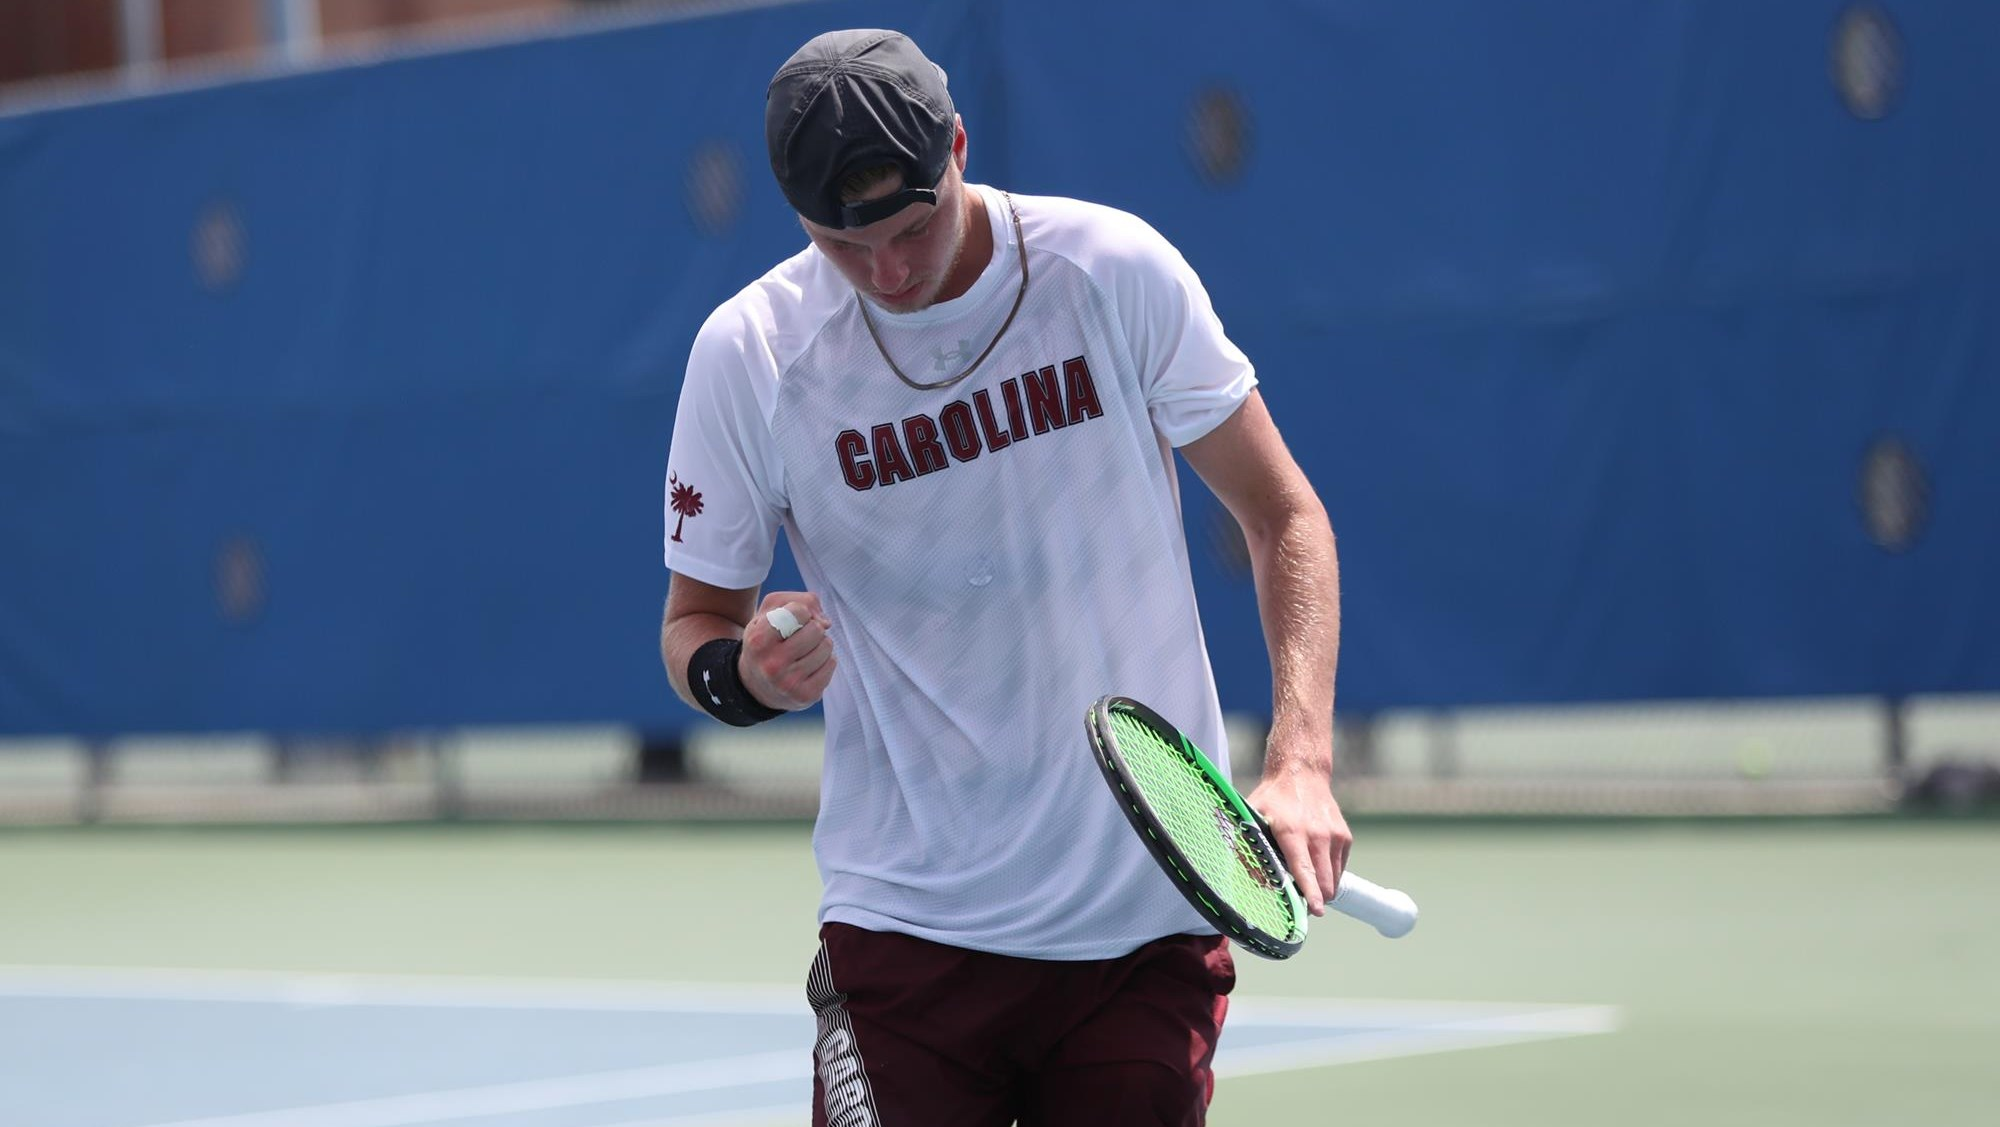 Gamecocks Headed to Title Matches